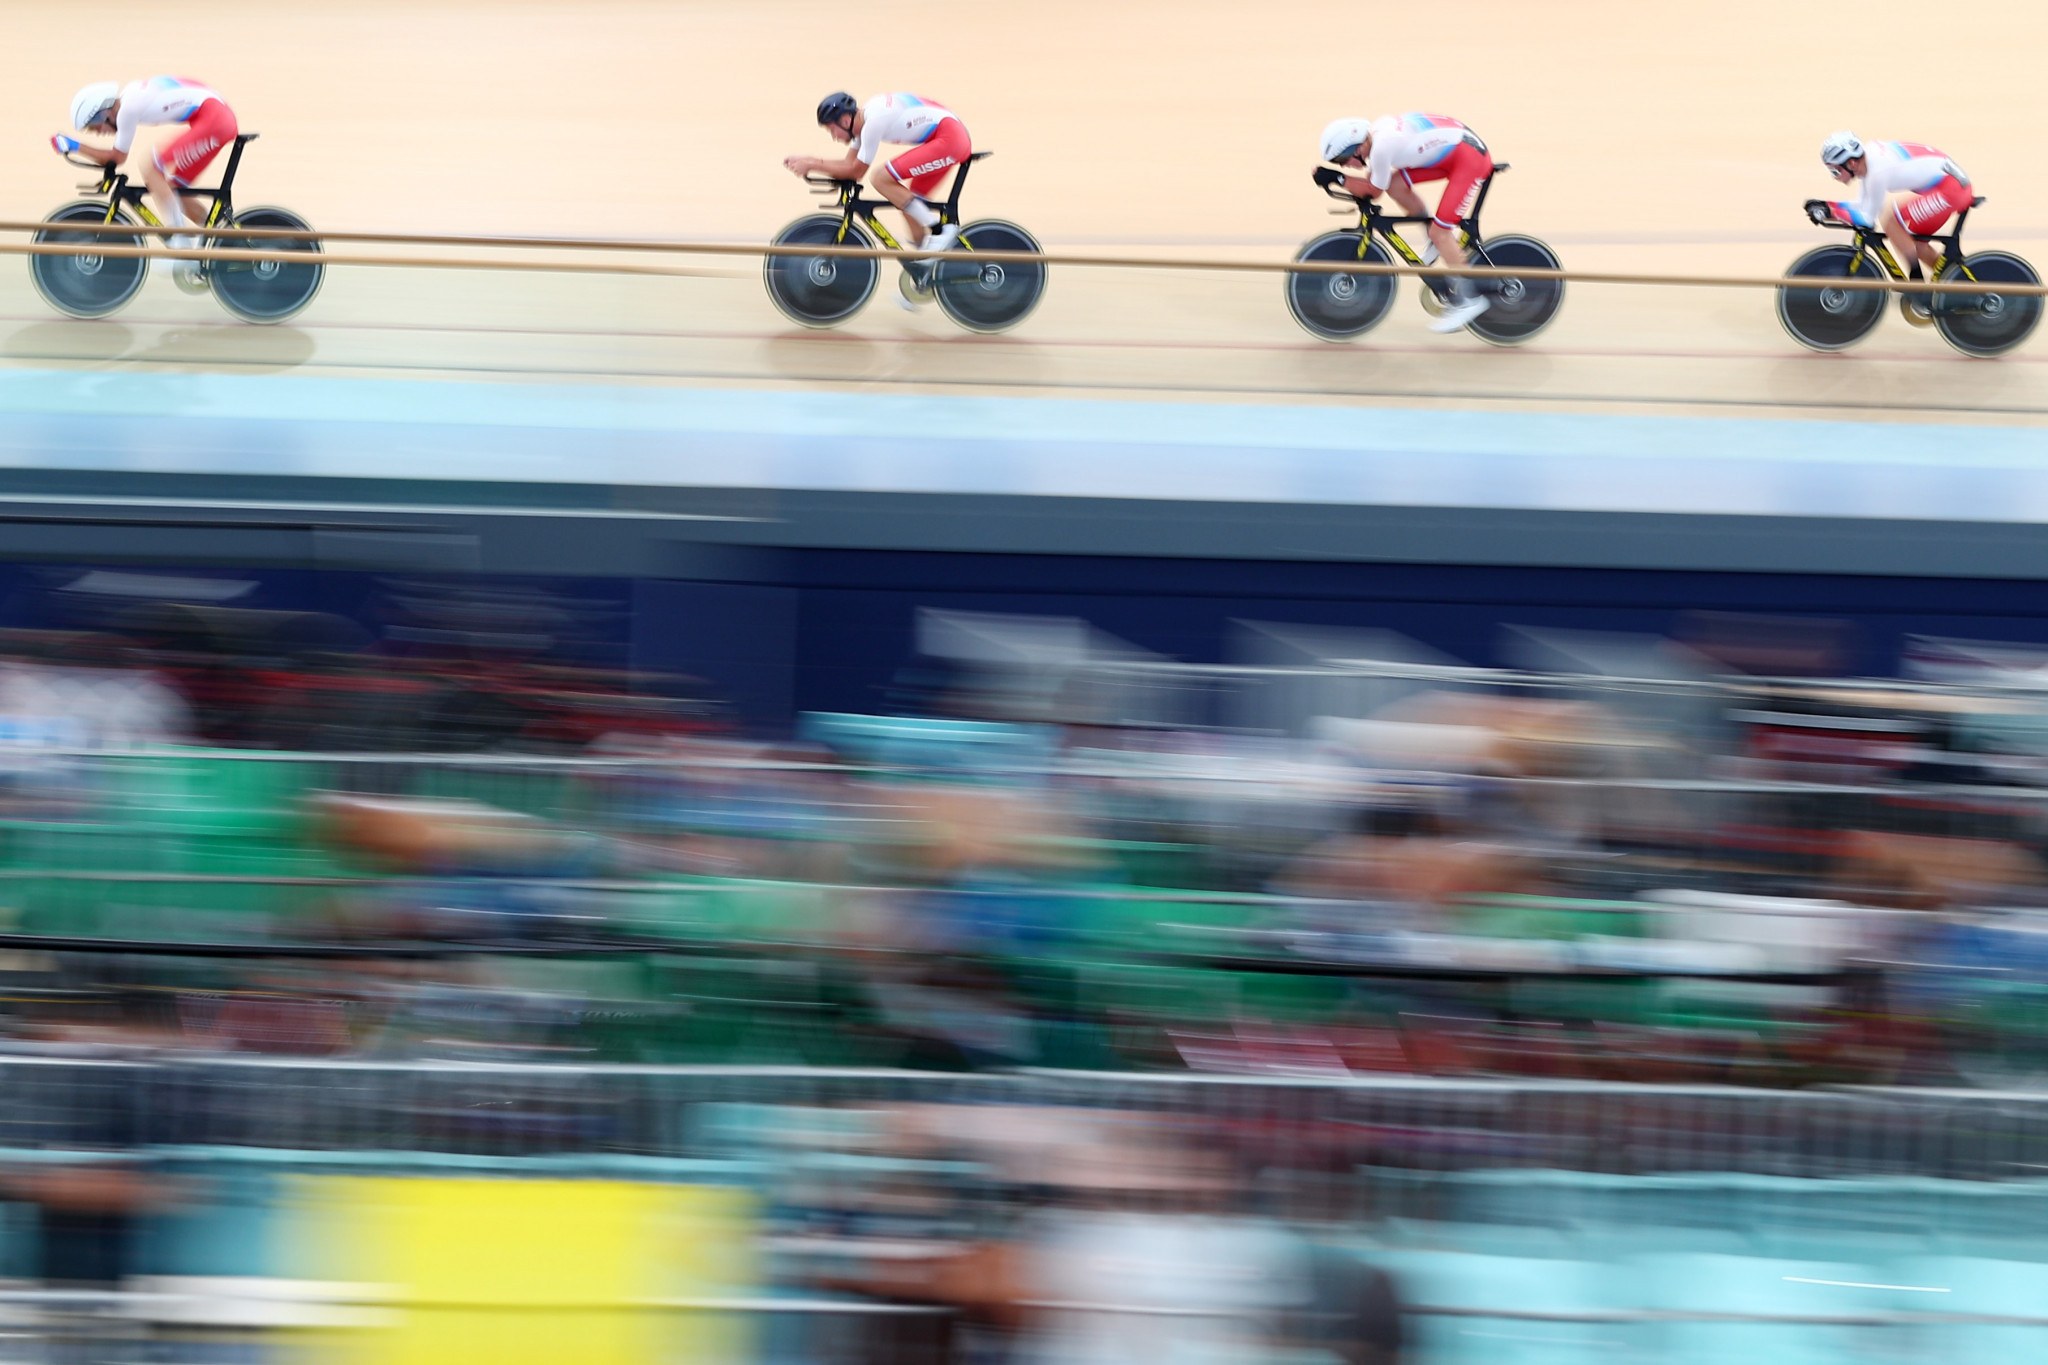 Brisbane to host penultimate event of UCI Track World Cup season